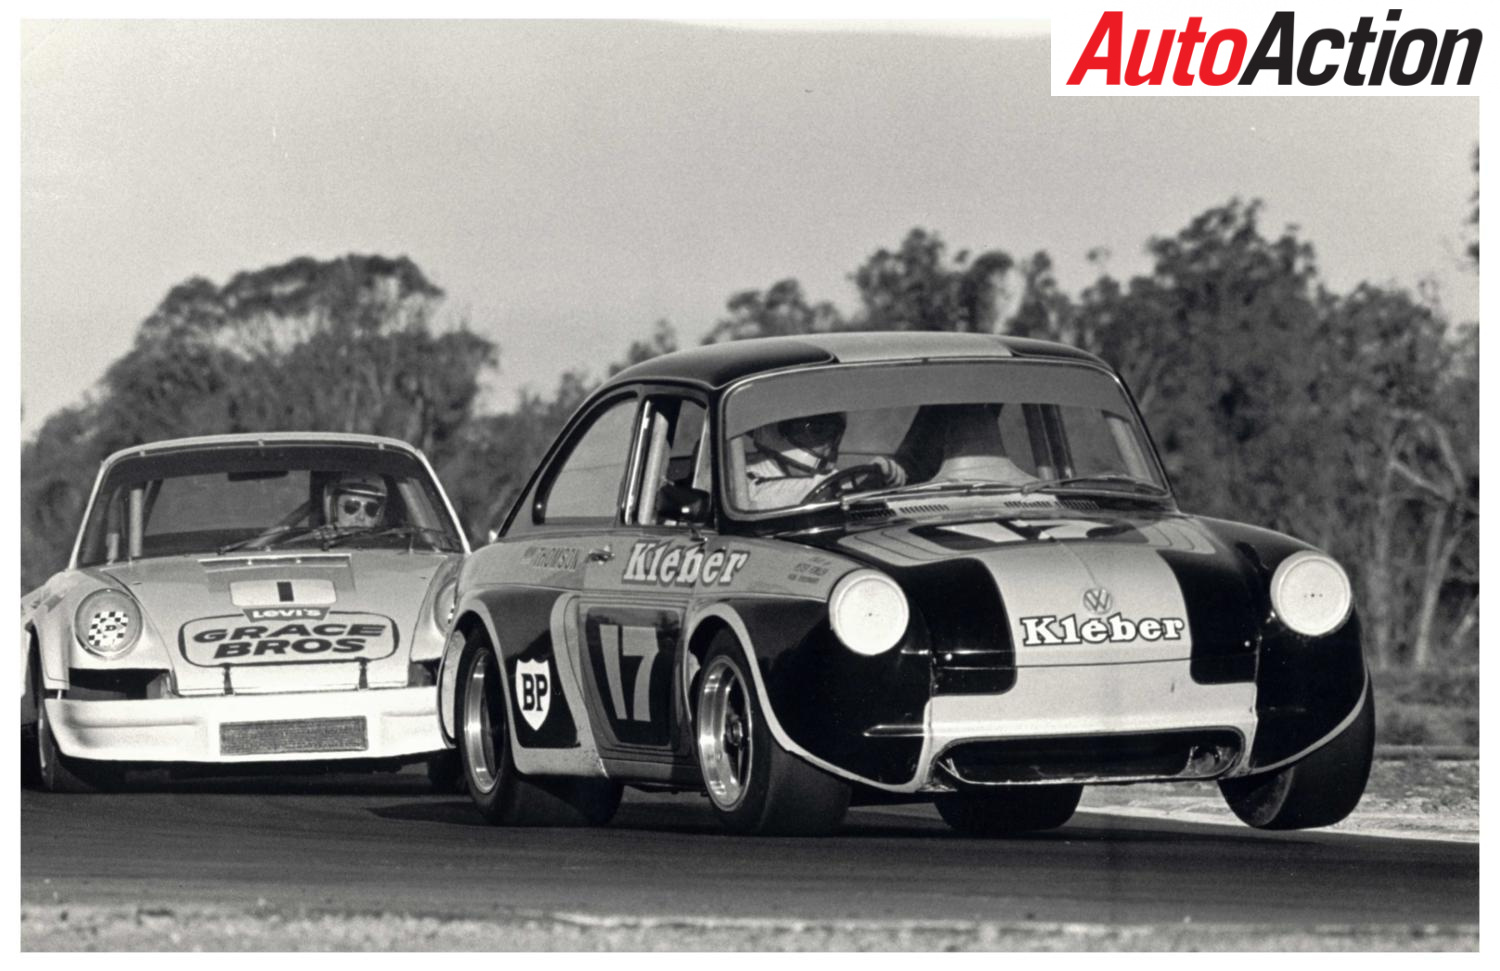 Famous sports sedan-Bryan Thomson's Volkswagen Chev is to be born again - Image: Auto Action Archive